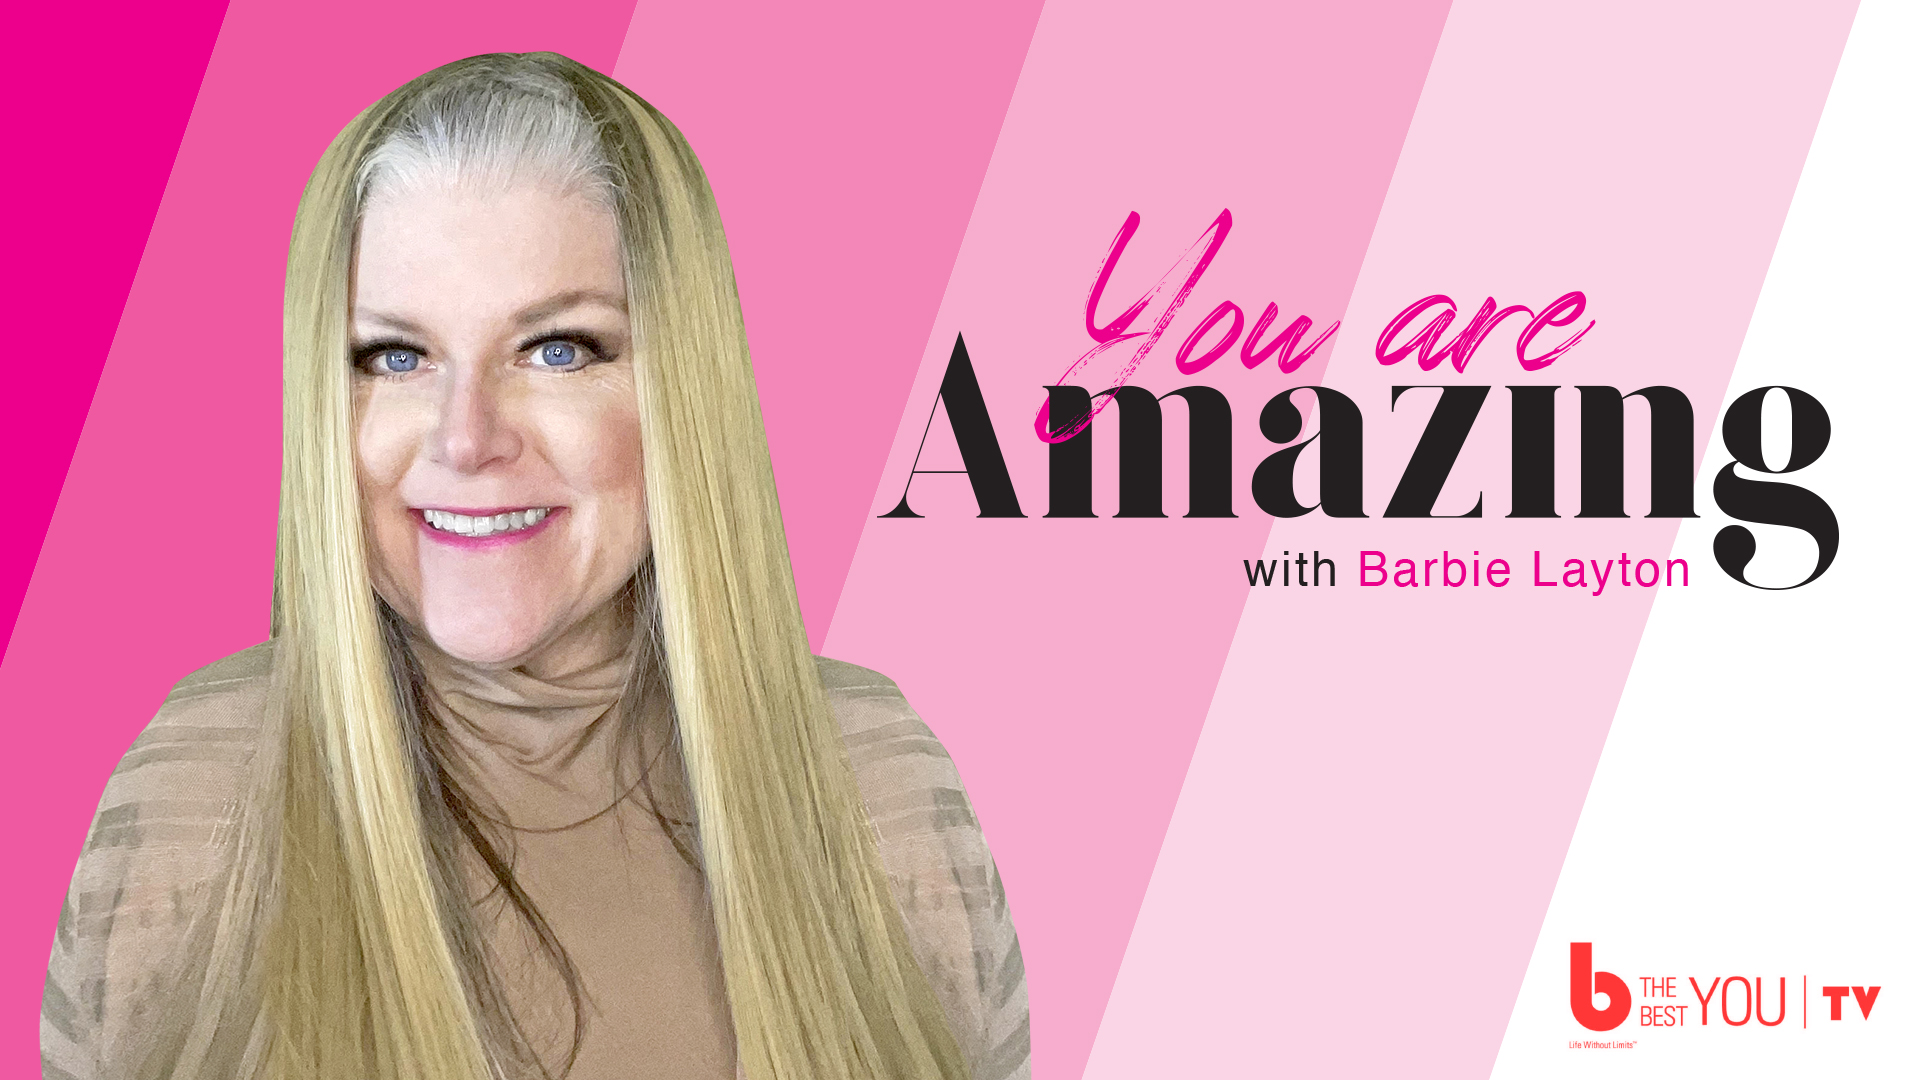 You Are Amazing - Barbie Layton with The Monroe Institute